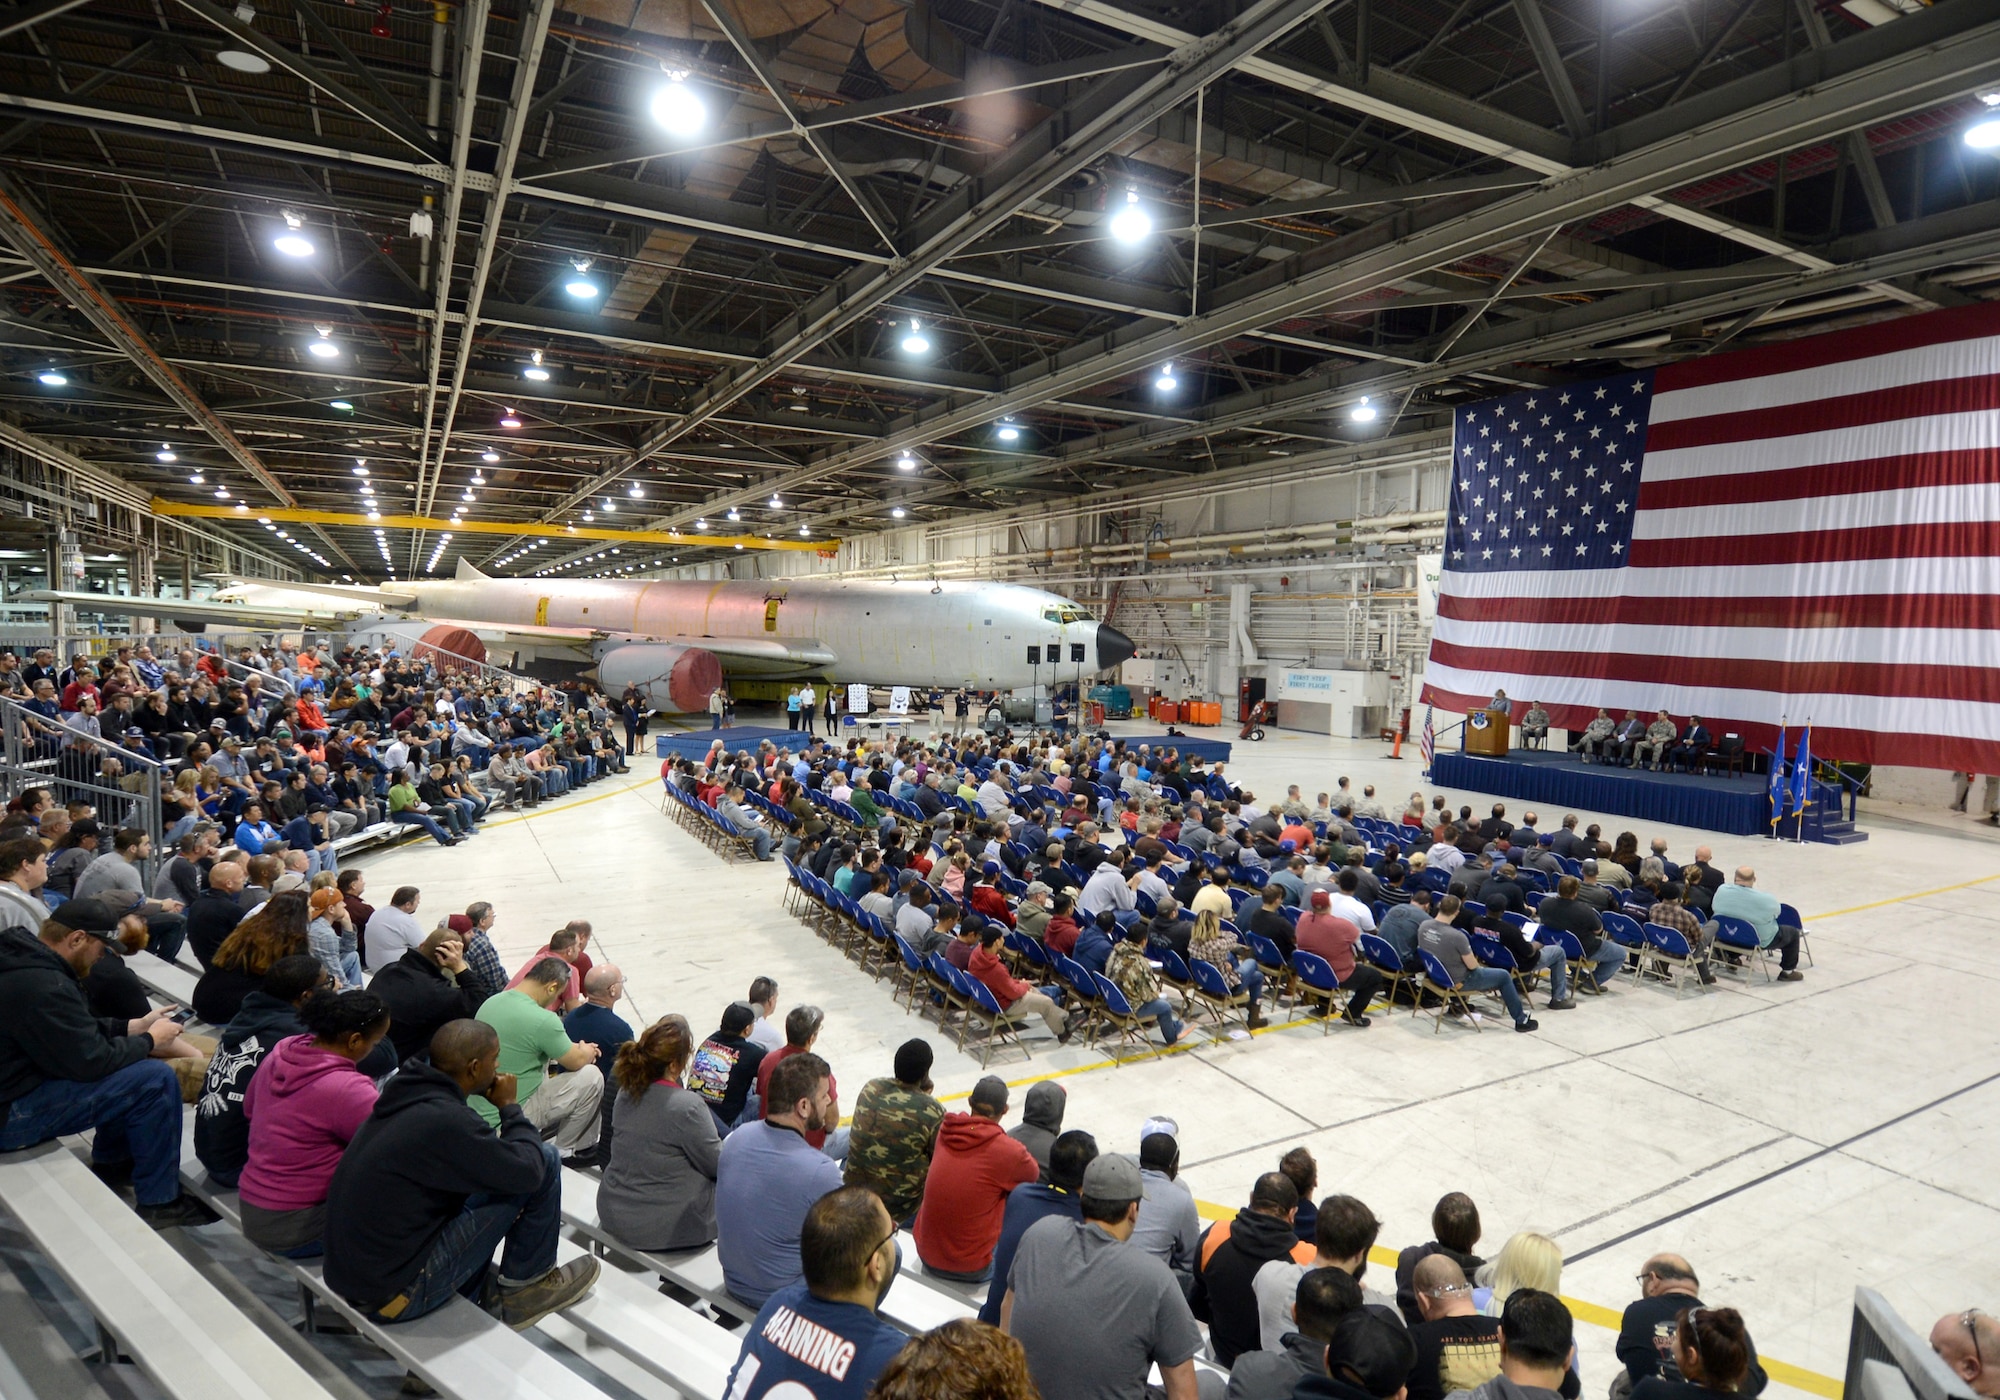 The KC-135 60th Anniversary brought a huge crowd to the programmed depot maintenance line in Bldg. 3001 Oct. 7. The event featured guest speakers from the Air Force Sustainment Center, Rockwell-Collins, Boeing and the Air Force Life Cycle Management Center. (Air Force photo by Kelly White)